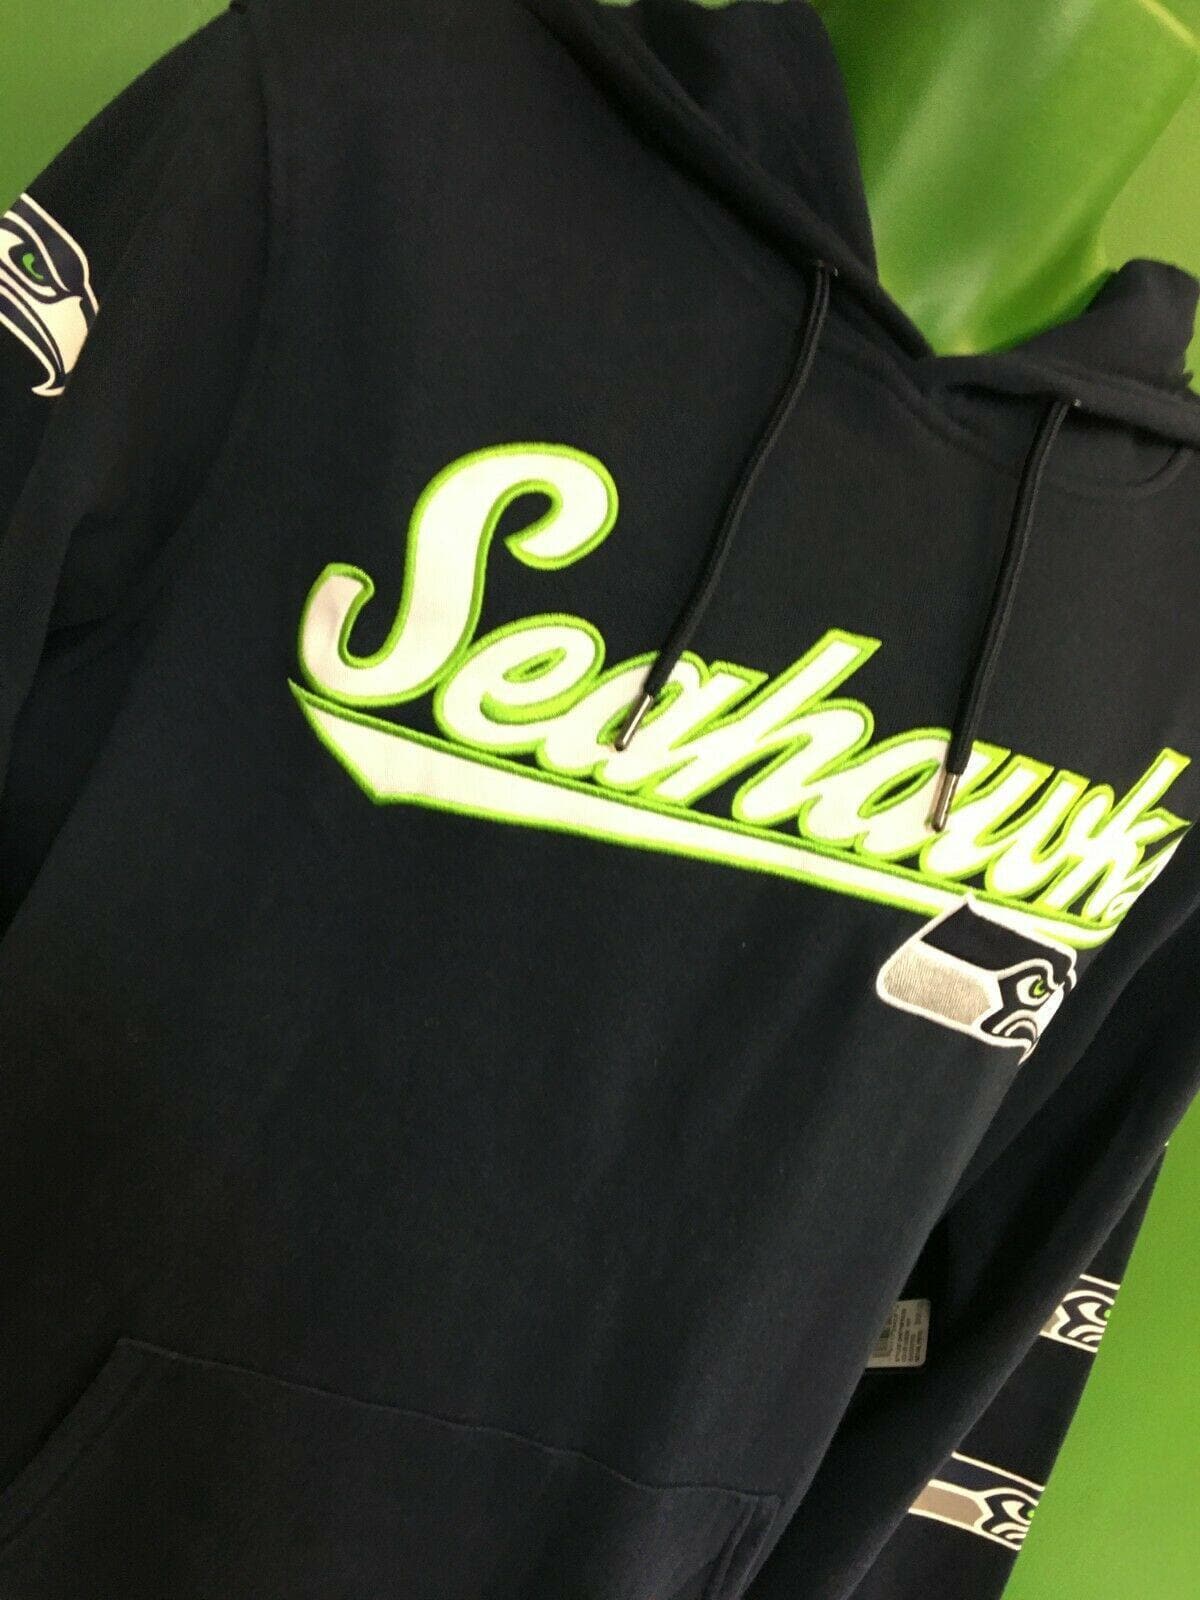 NFL Seattle Seahawks Stitched Spellout Hoodie Men's Small NWT